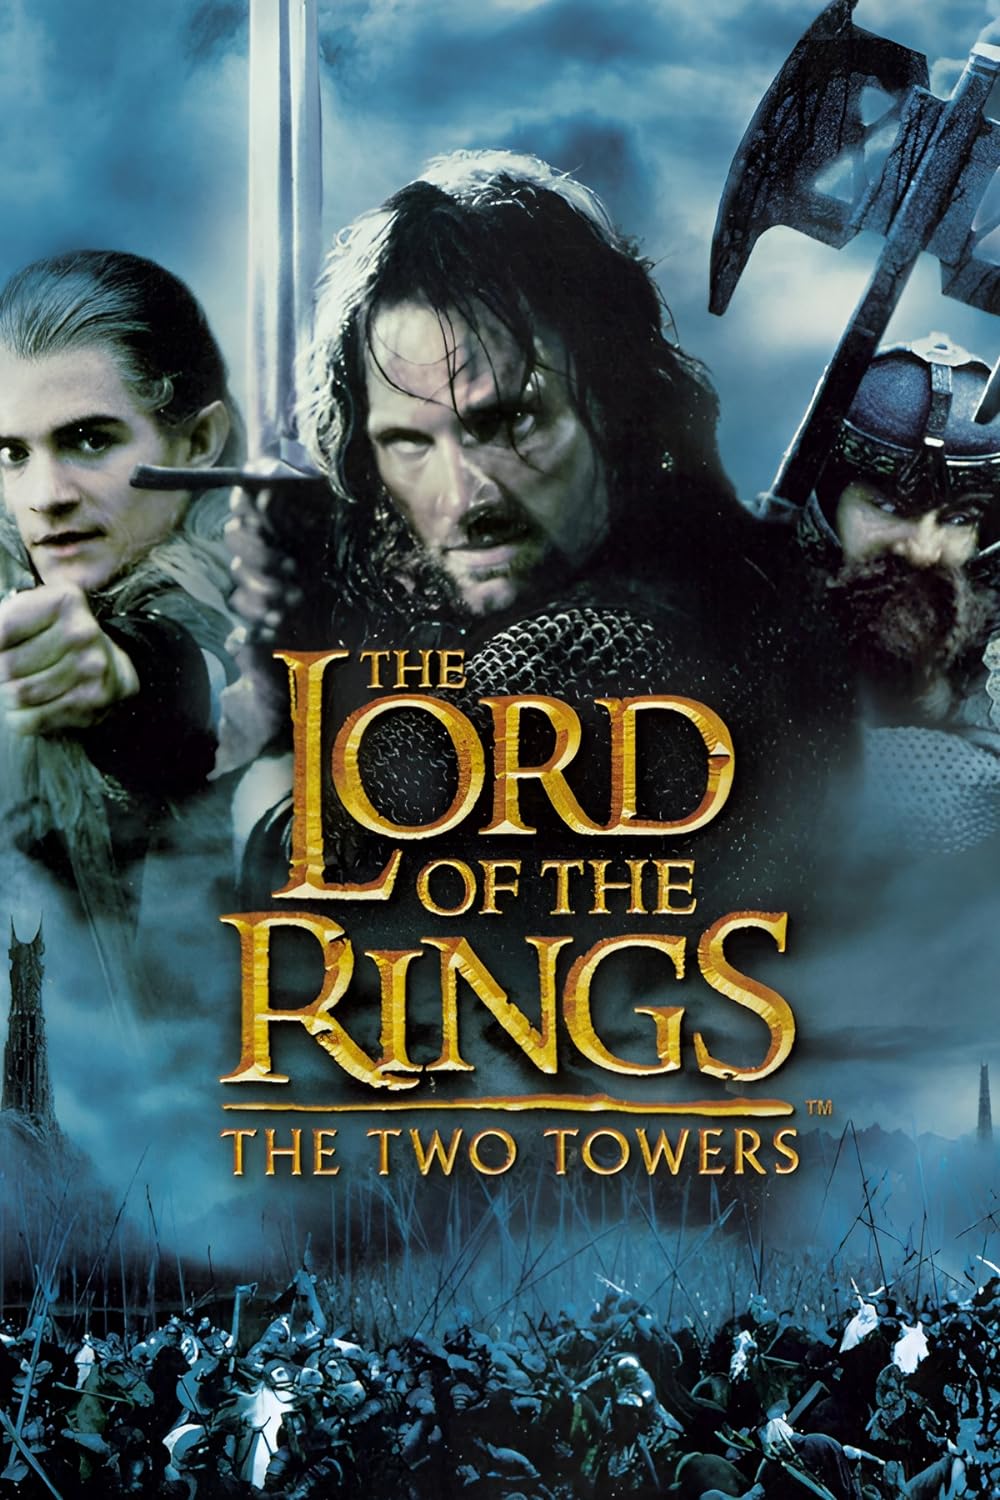 The Lord of the Rings- The Two Towers Extended 2002 3D Conversion 1080p MVC Atmos 7 1 Multi Subs doogle